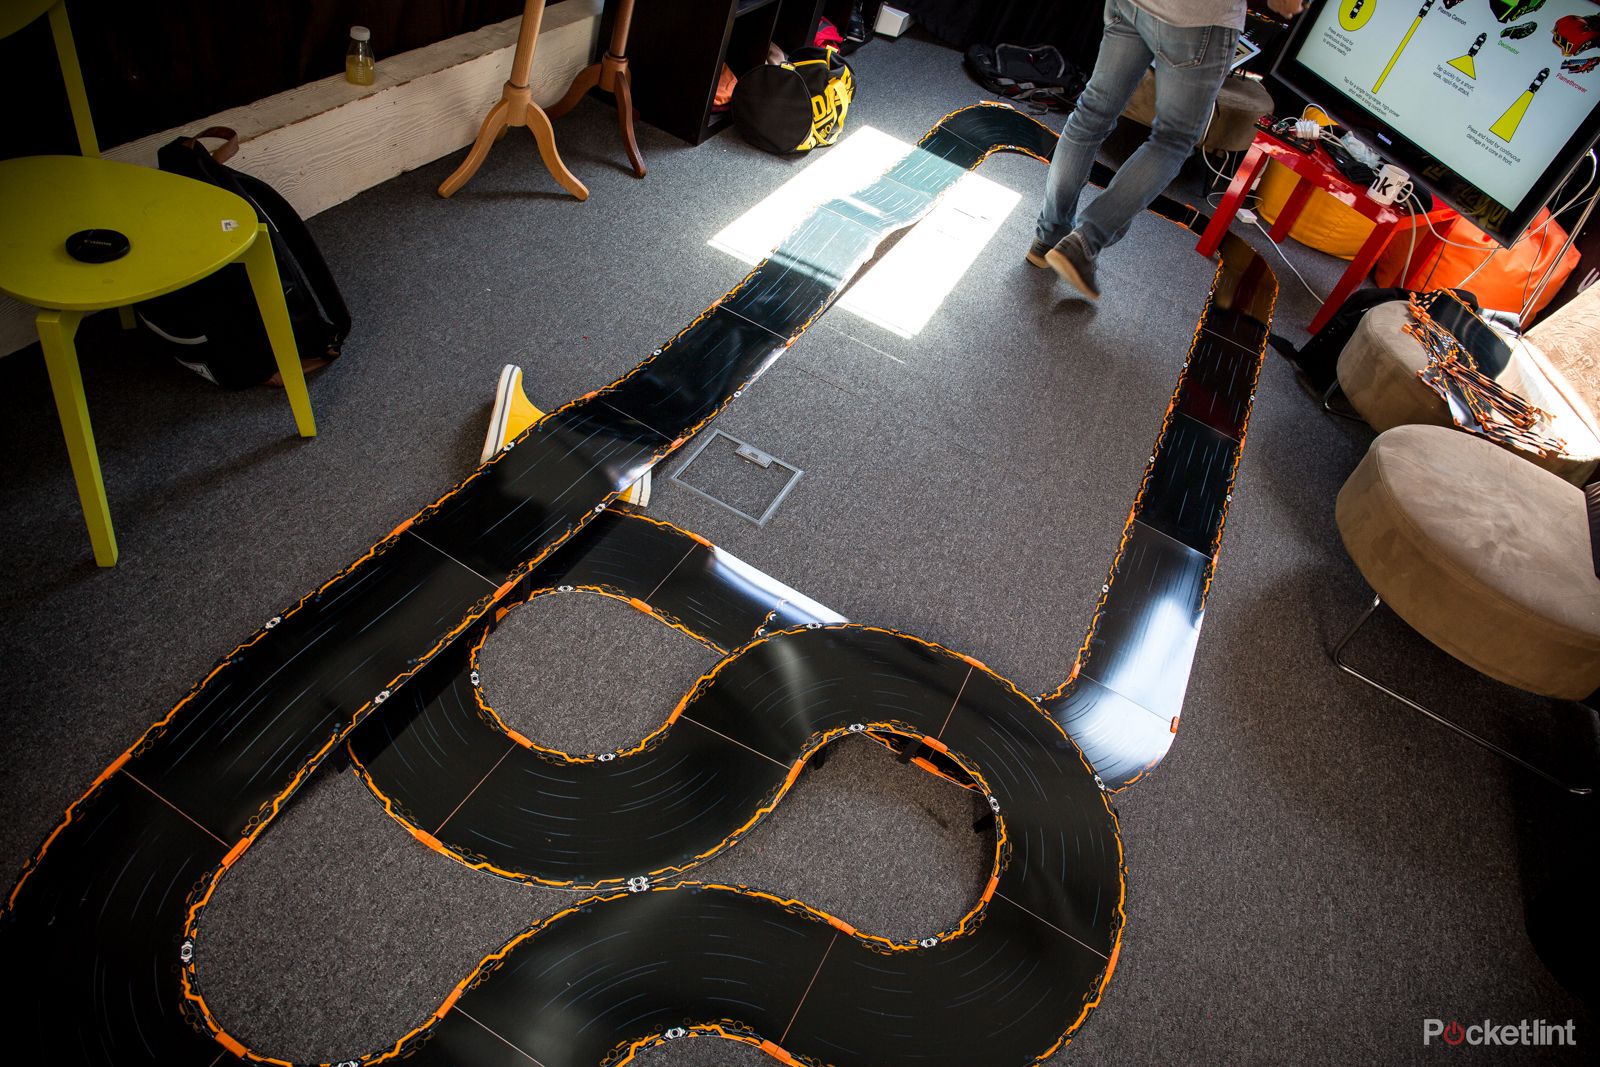 anki overdrive review image 3